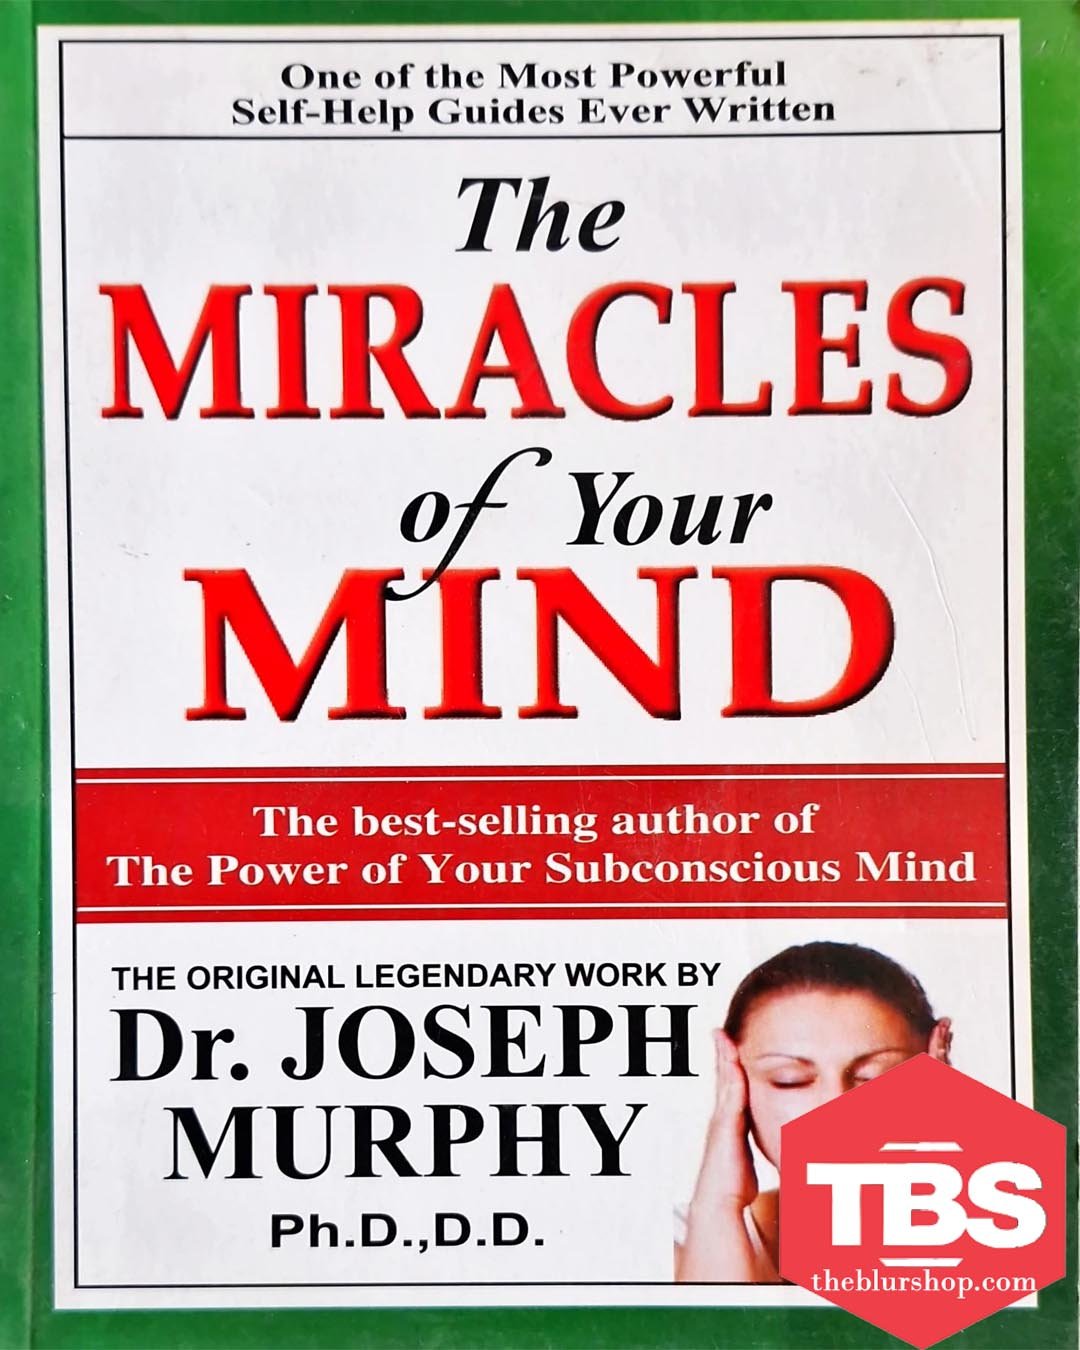 The Miracles of Your Mind